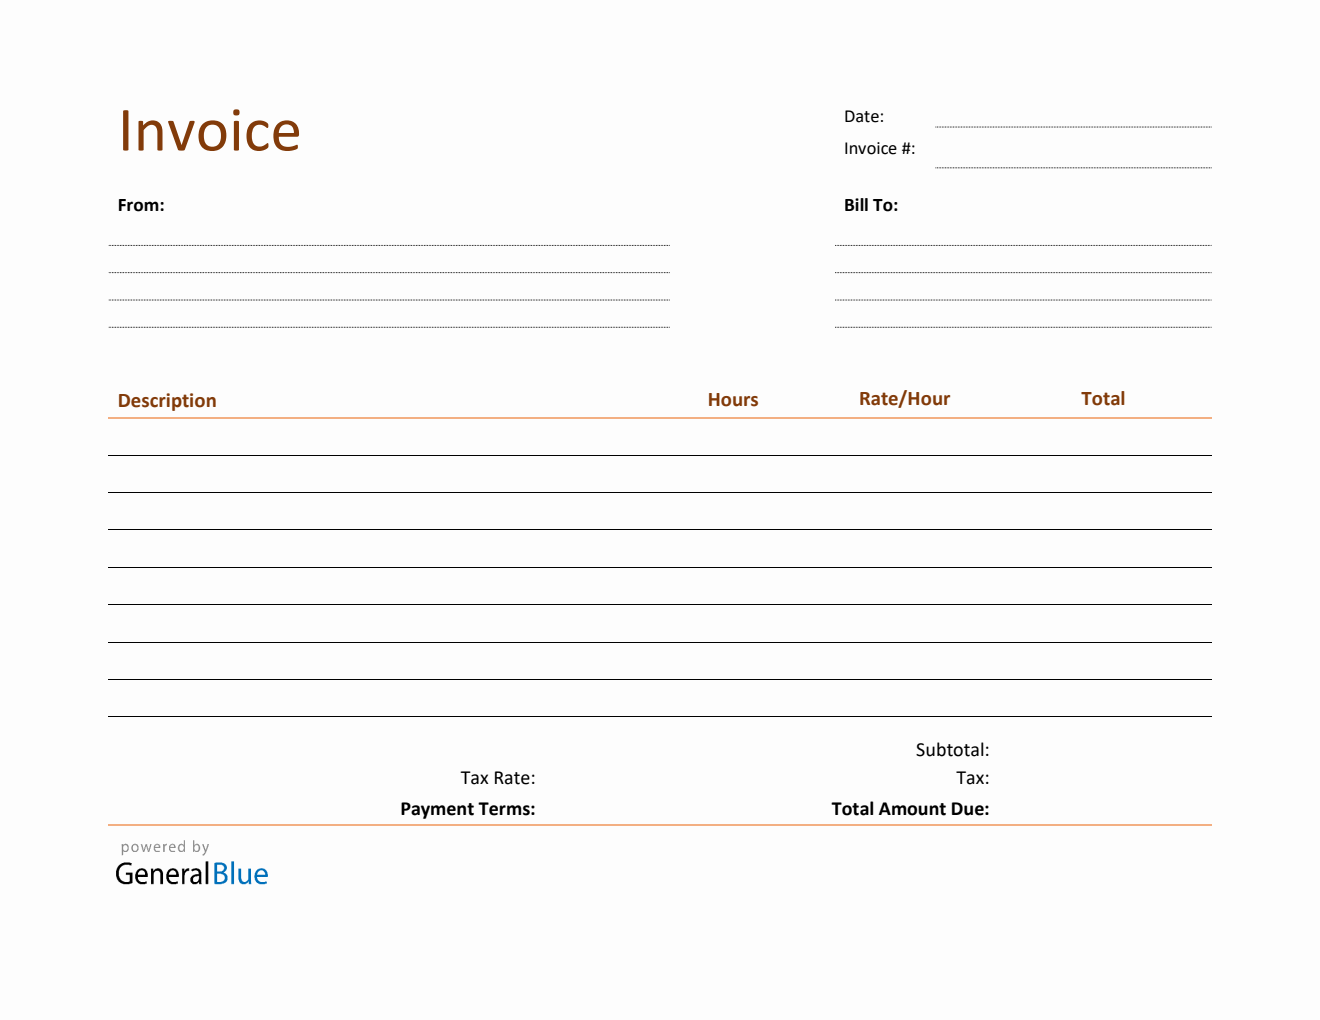 Blank Invoice Template in PDF Basic